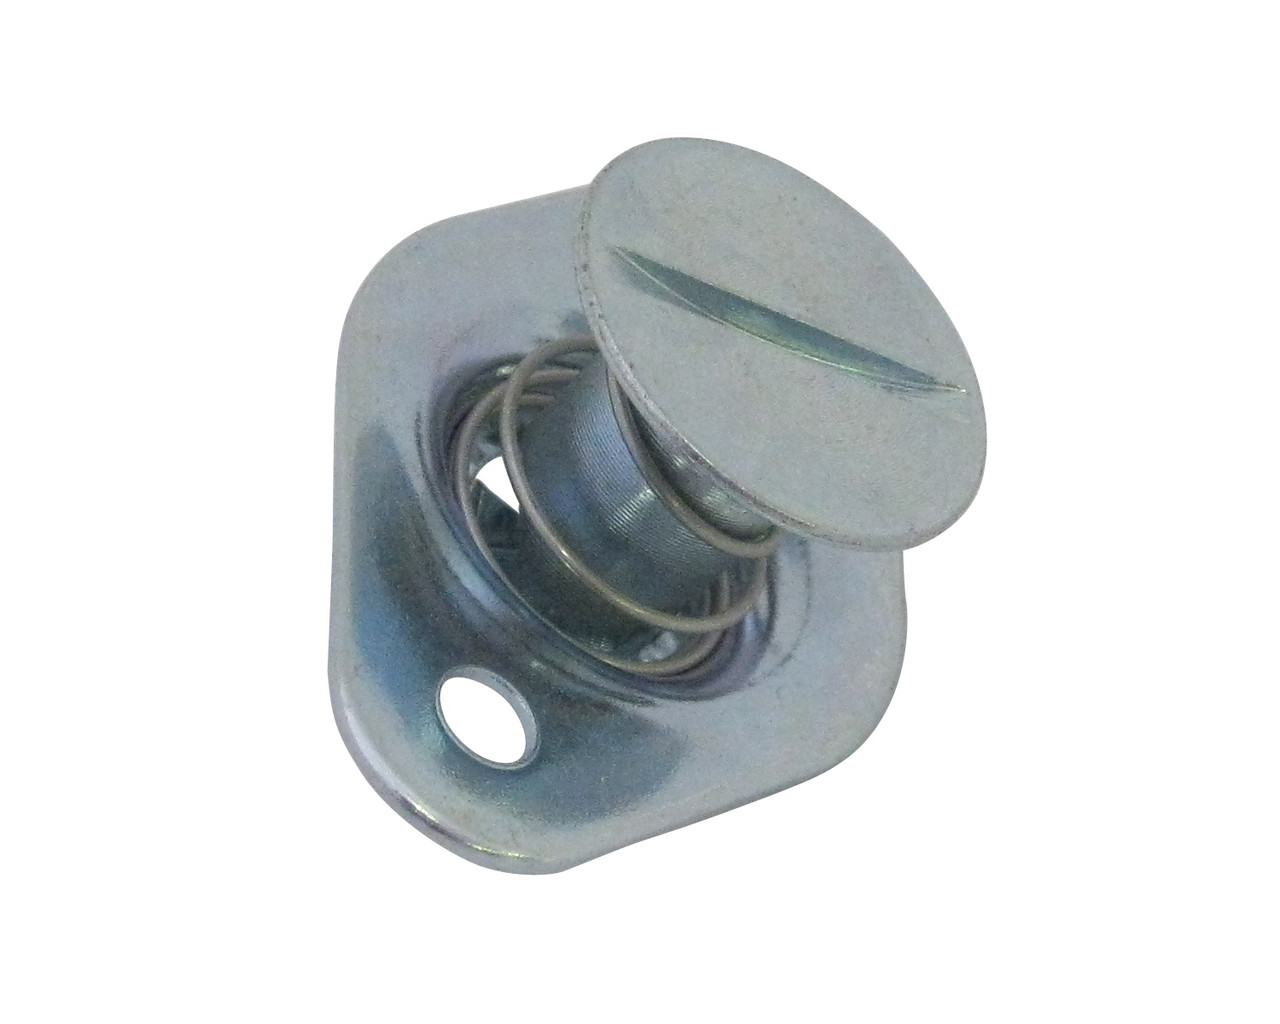 7/16" Self Ejecting Button